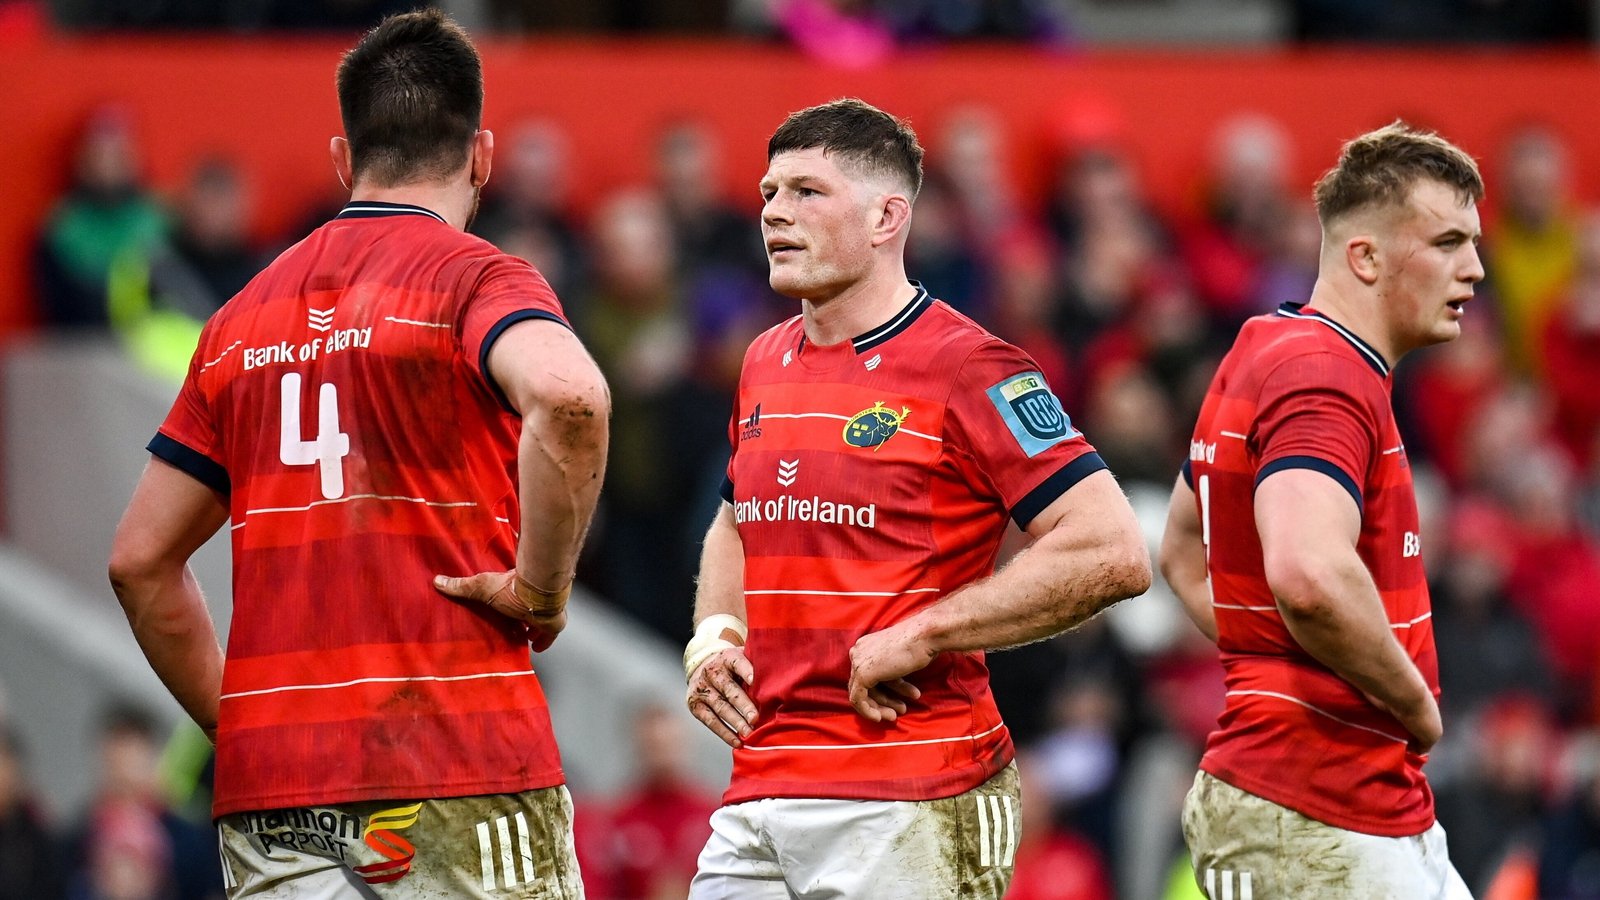 Nervous wait for Munster with two massive games ahead